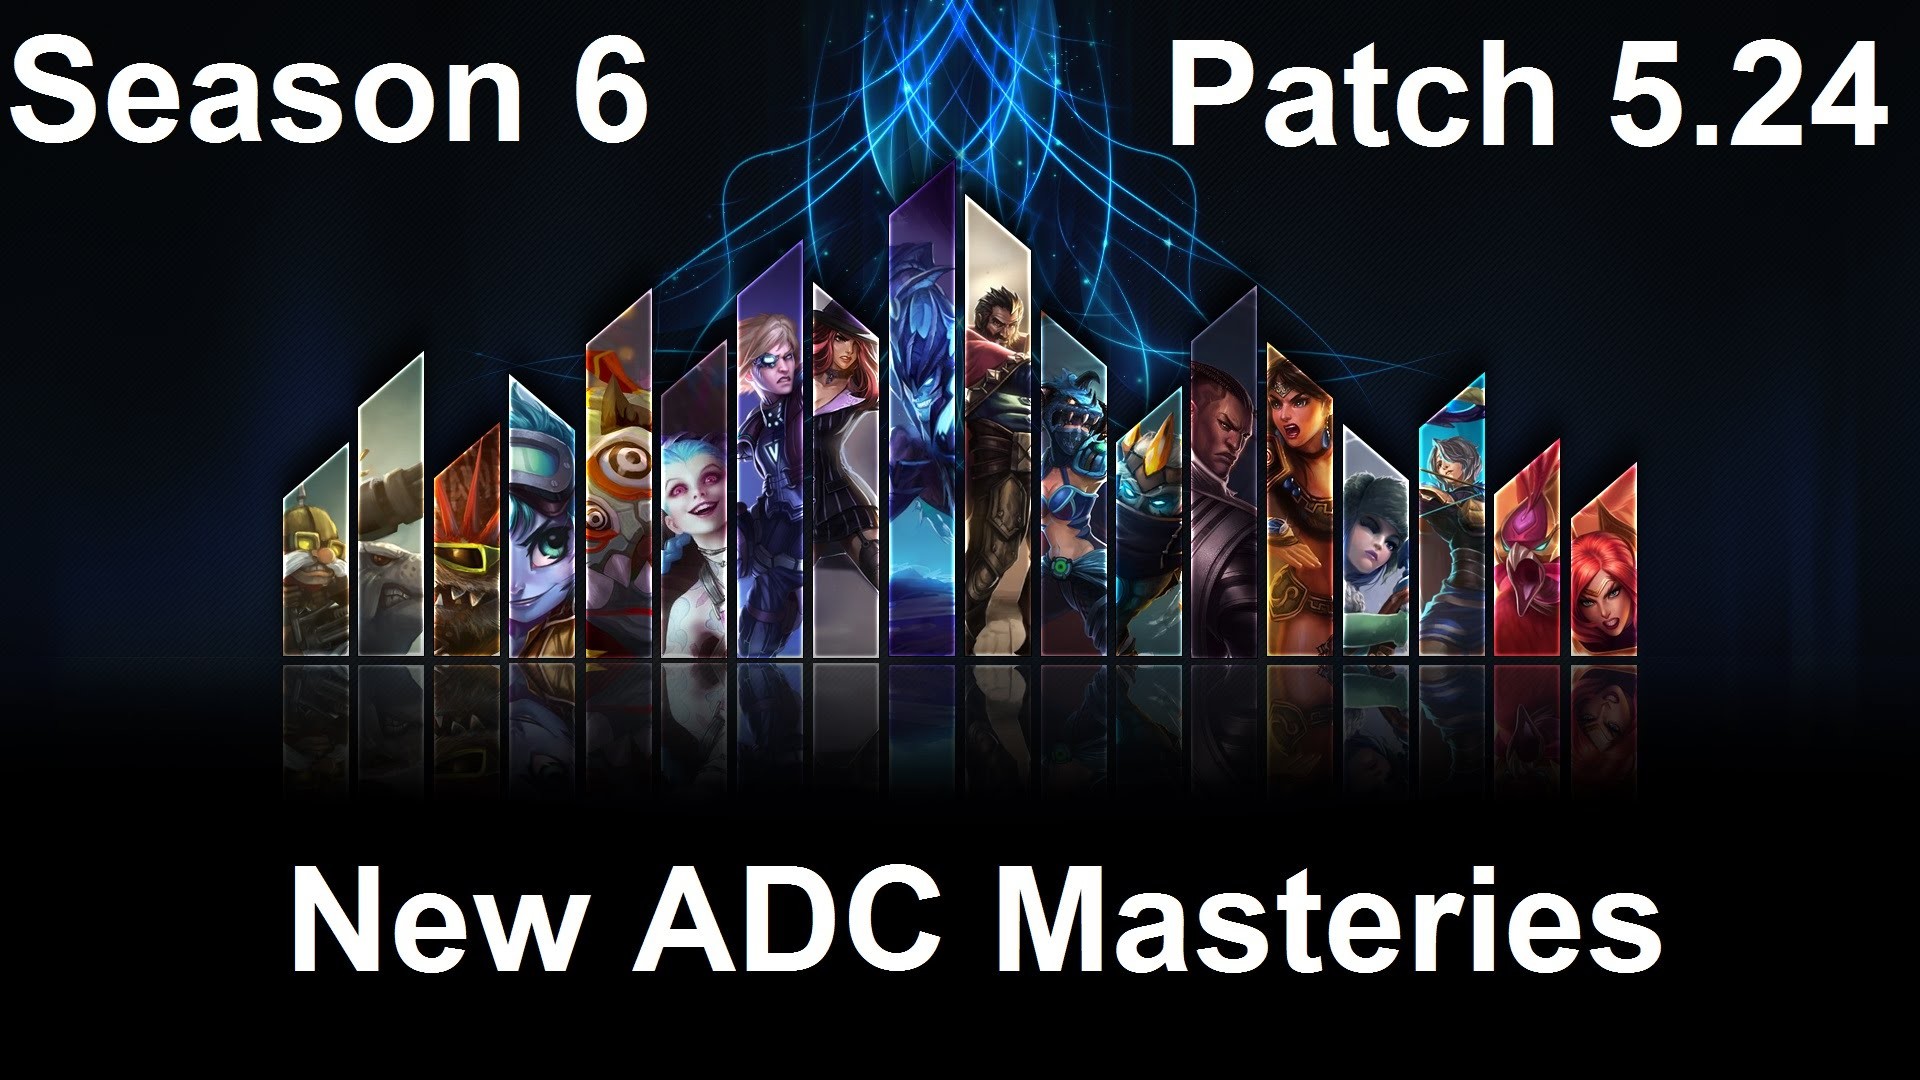 Season 6 Patch 5.24 New Masteries ADC by Doublelift, Sneaky, Imaqtpie, Deft – YouTube